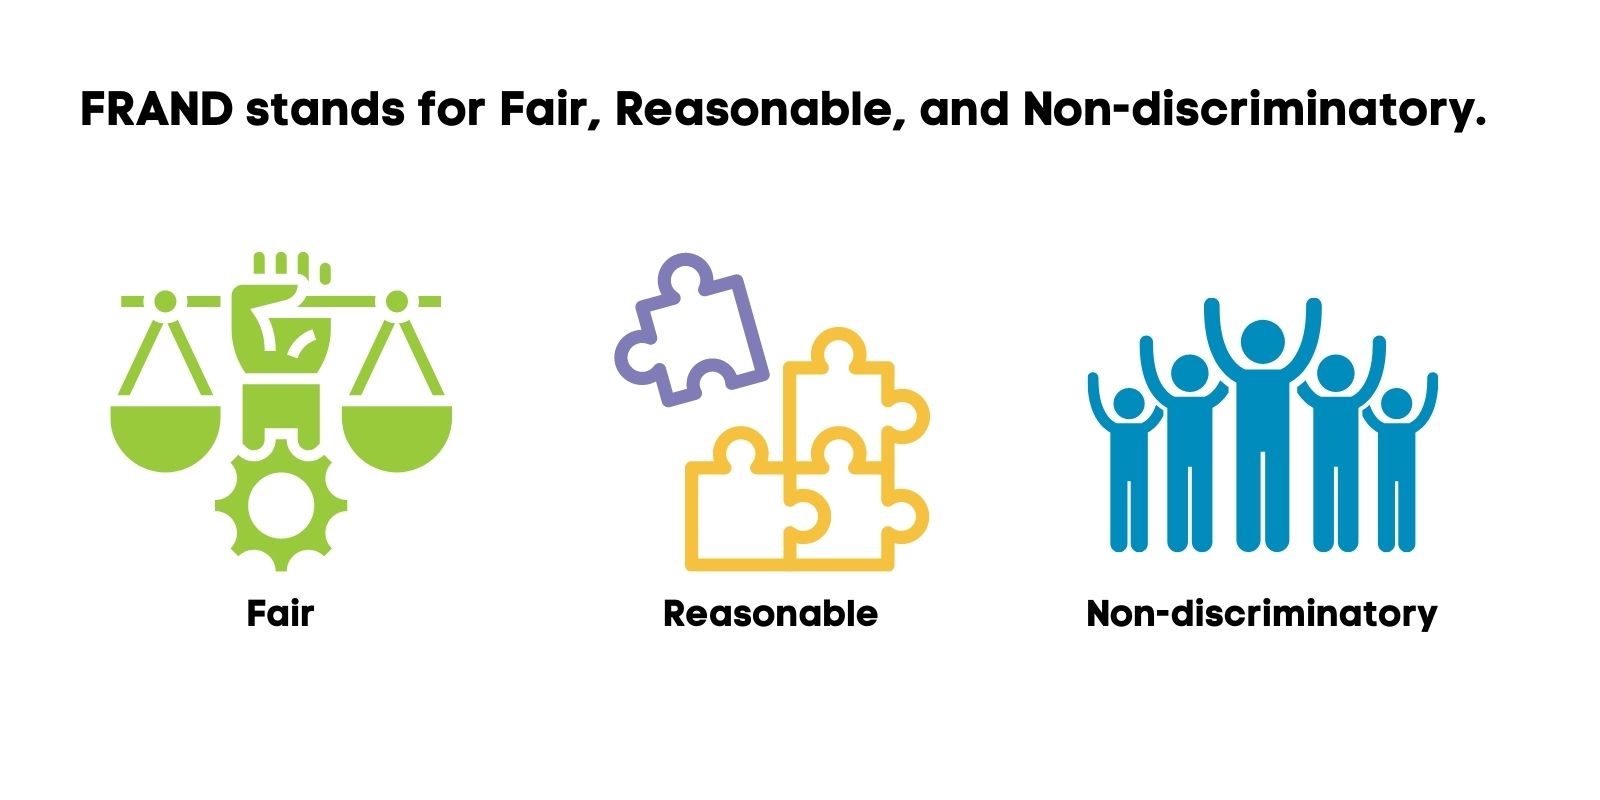 FRAND stands for Fair, Reasonable, and Non-Discriminatory (